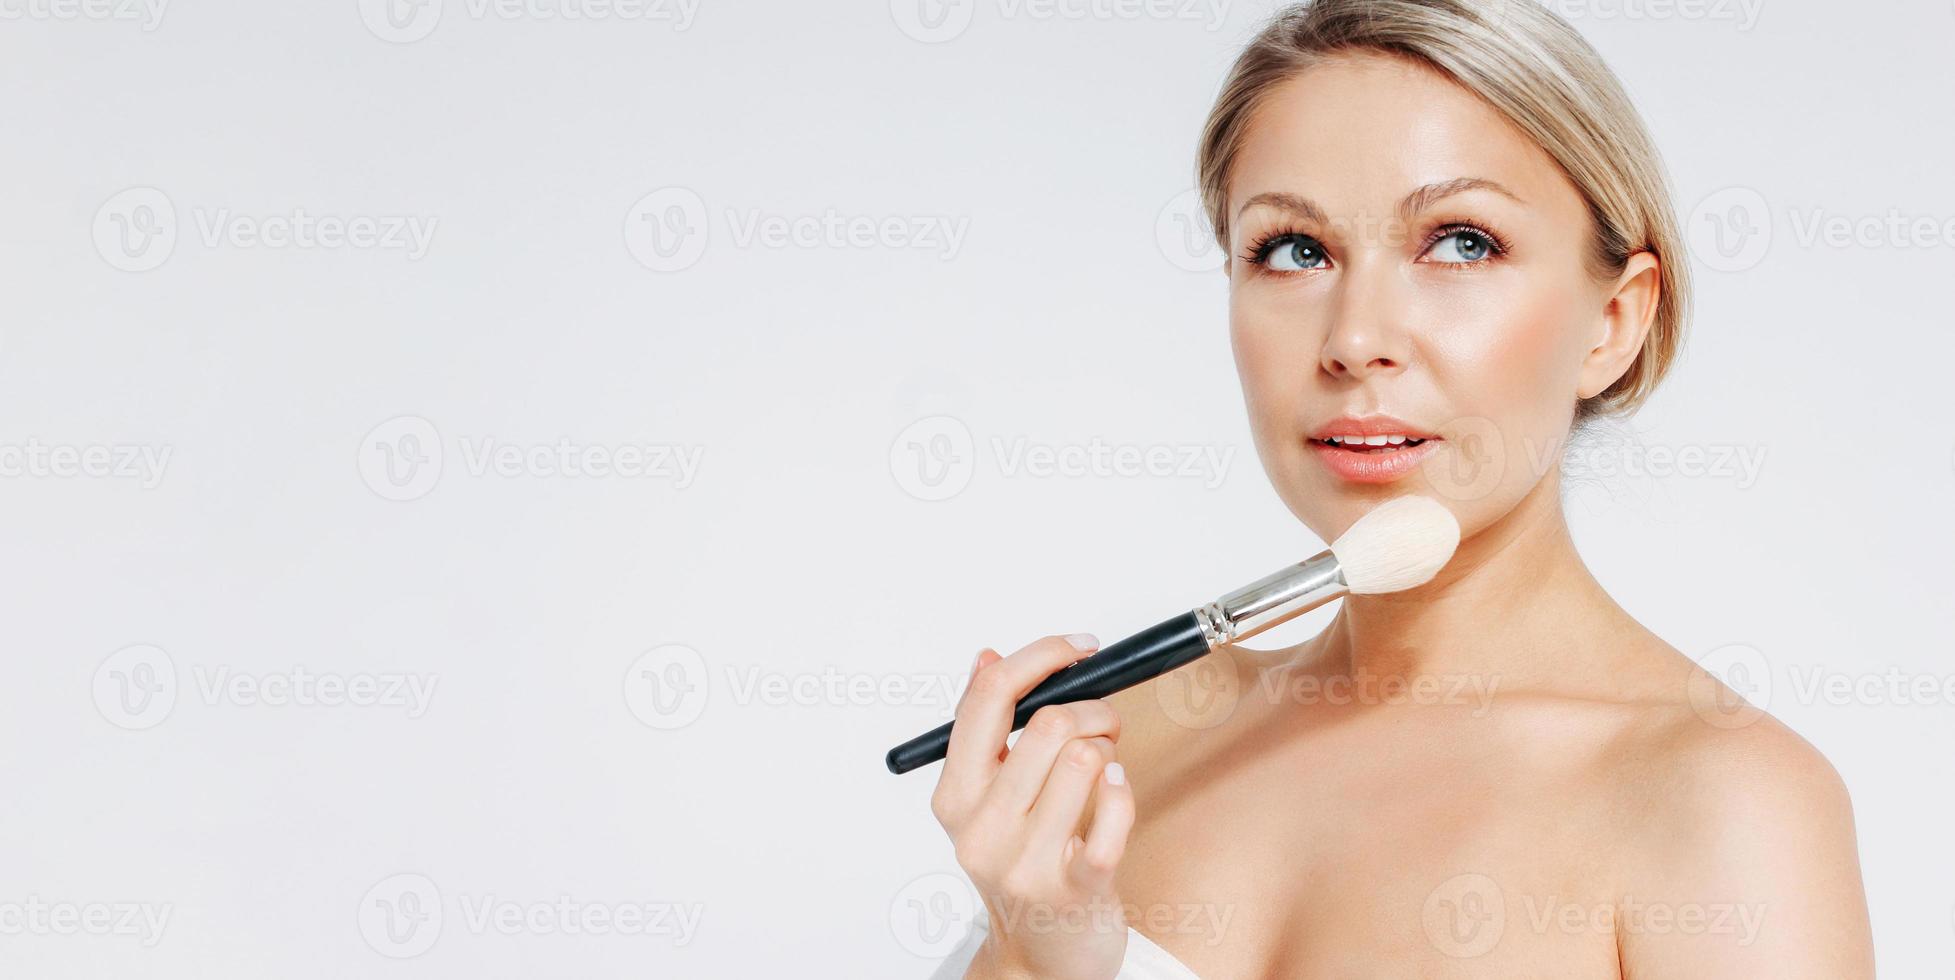 Beauty blonde smiling woman 35 year with brush near clean fresh face isolated on white background, banner photo